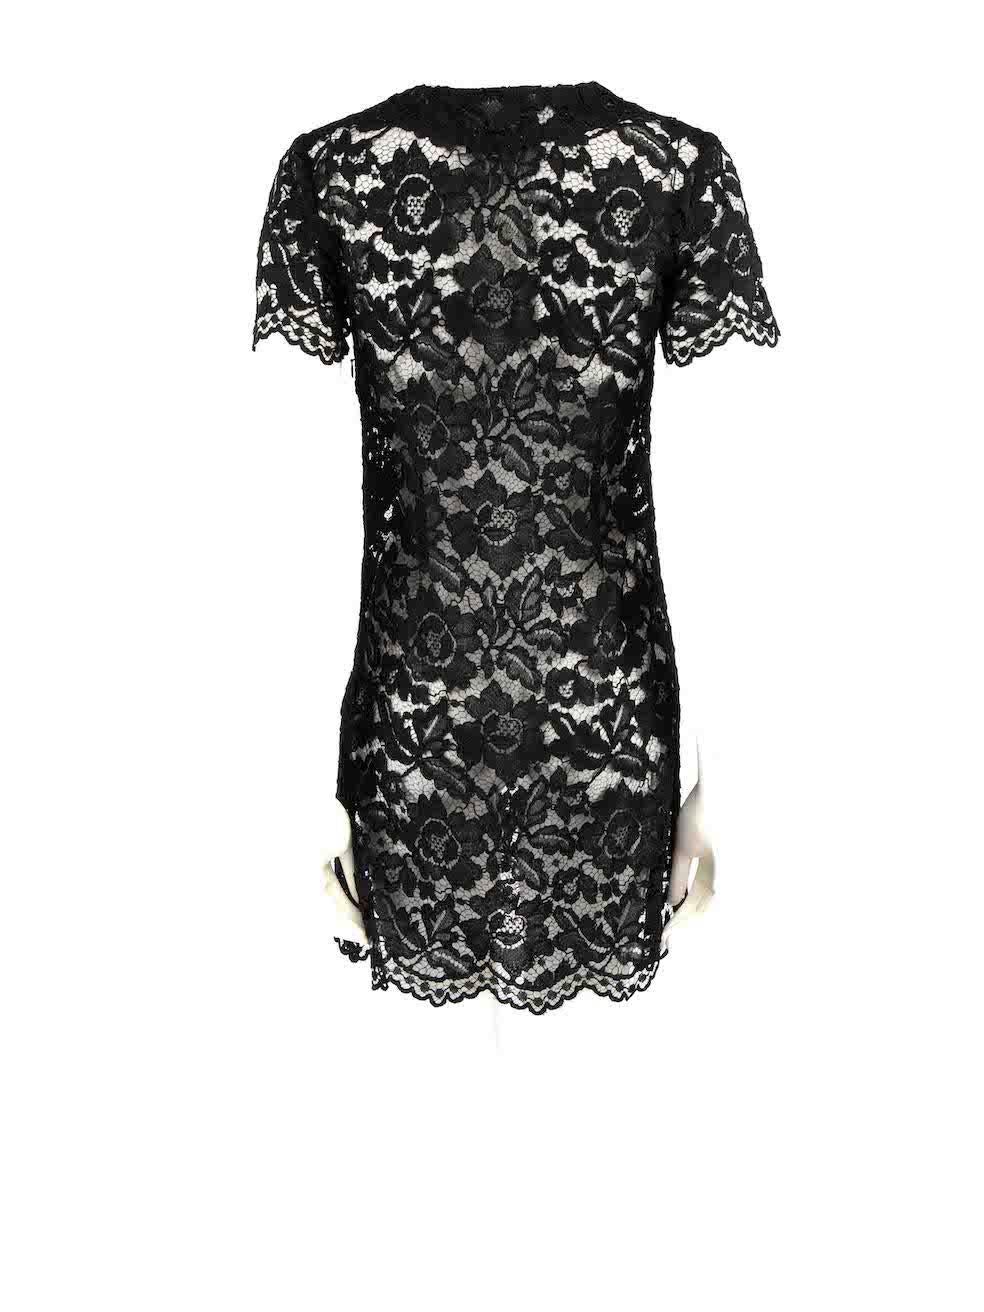 Sandro Black Lace Mini Dress Size S In Good Condition For Sale In London, GB